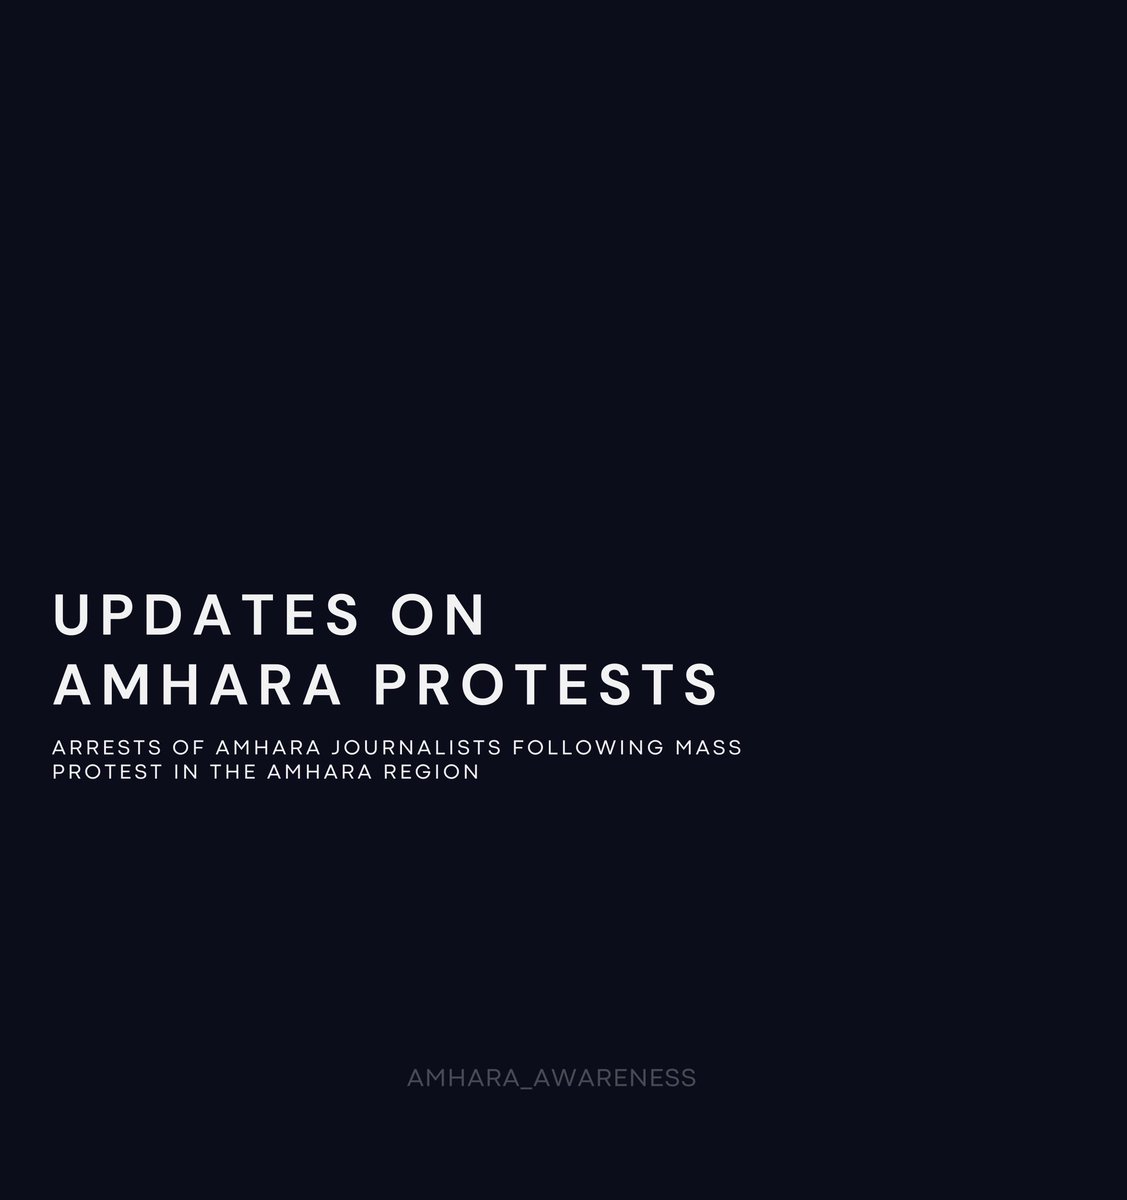 In response to coverage on the #AmharaProtests, security forces enforced a crackdown on journalists and media staff, particularly those who are ethnically Amhara. Despite condemnation by international human rights organizations, these journalists remain imprisoned: